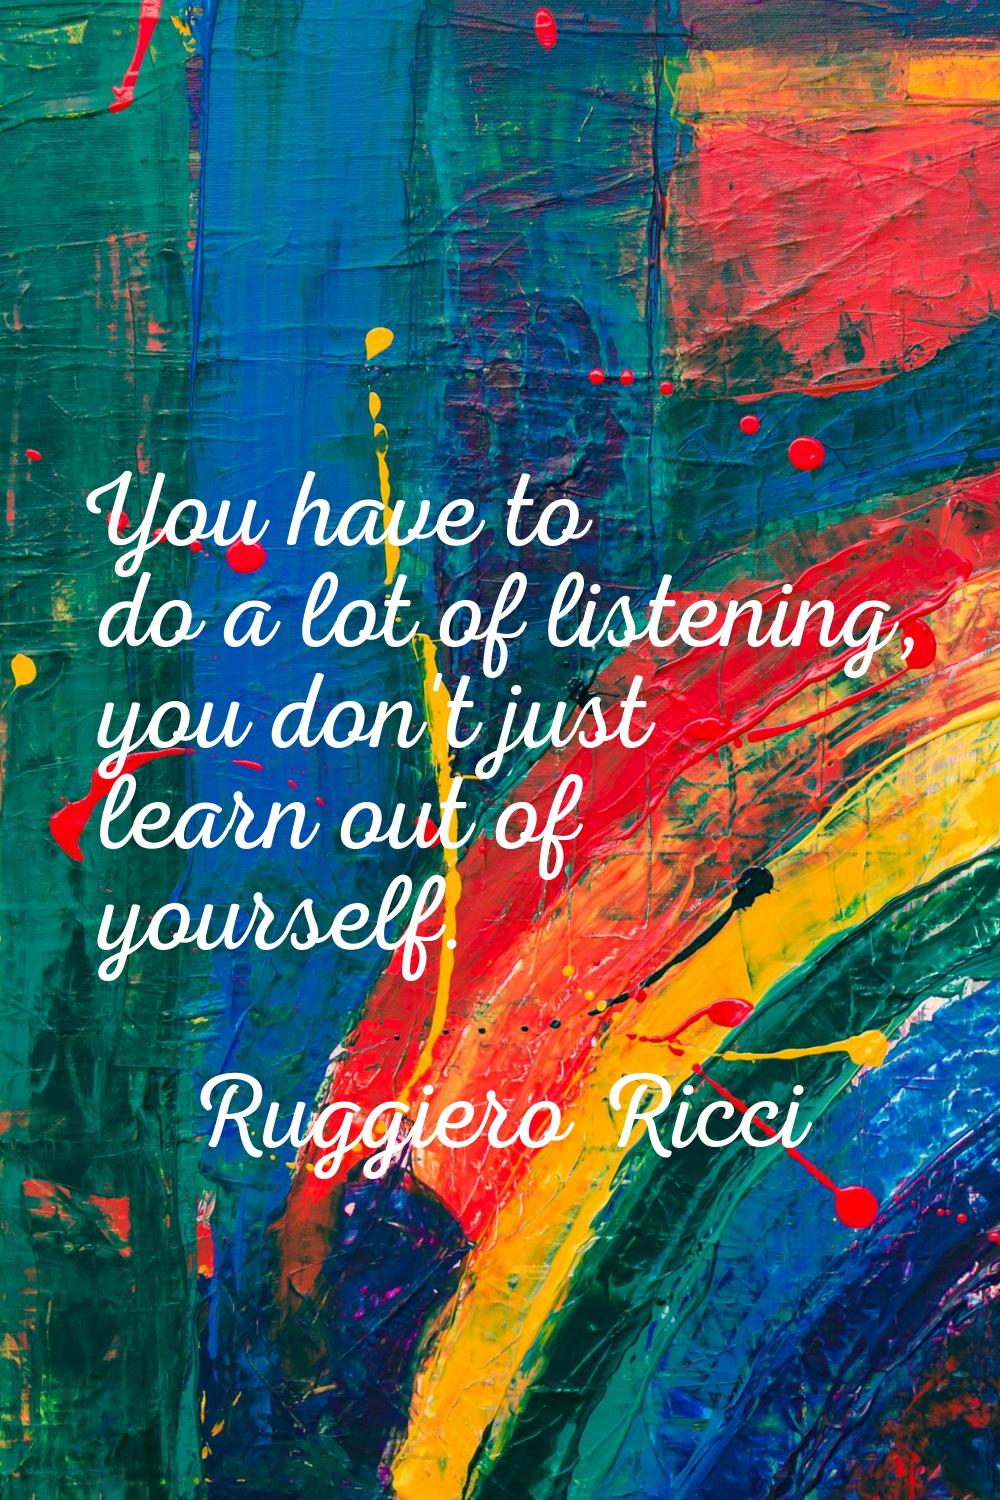 You have to do a lot of listening, you don't just learn out of yourself.